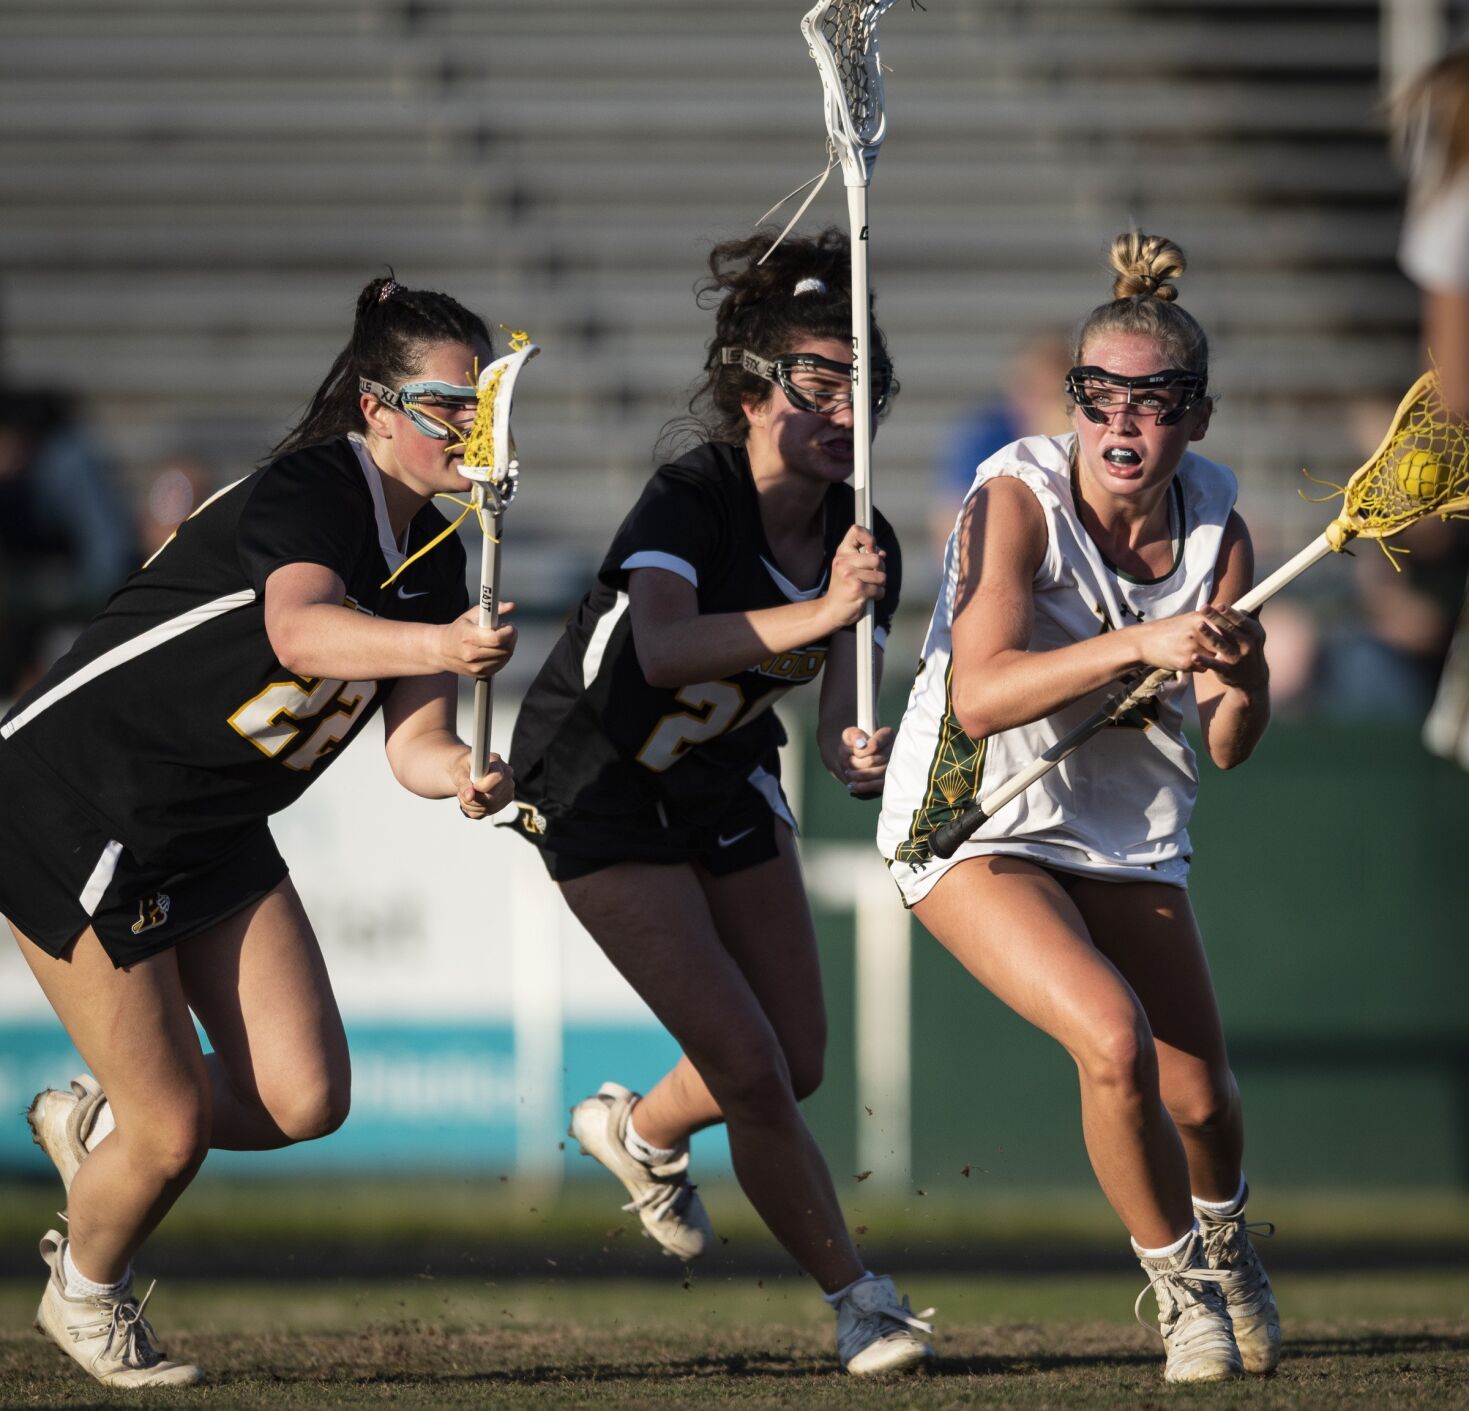 NCHSAA State Tournaments: Lacrosse & Tennis Brackets Revealed for Area Teams